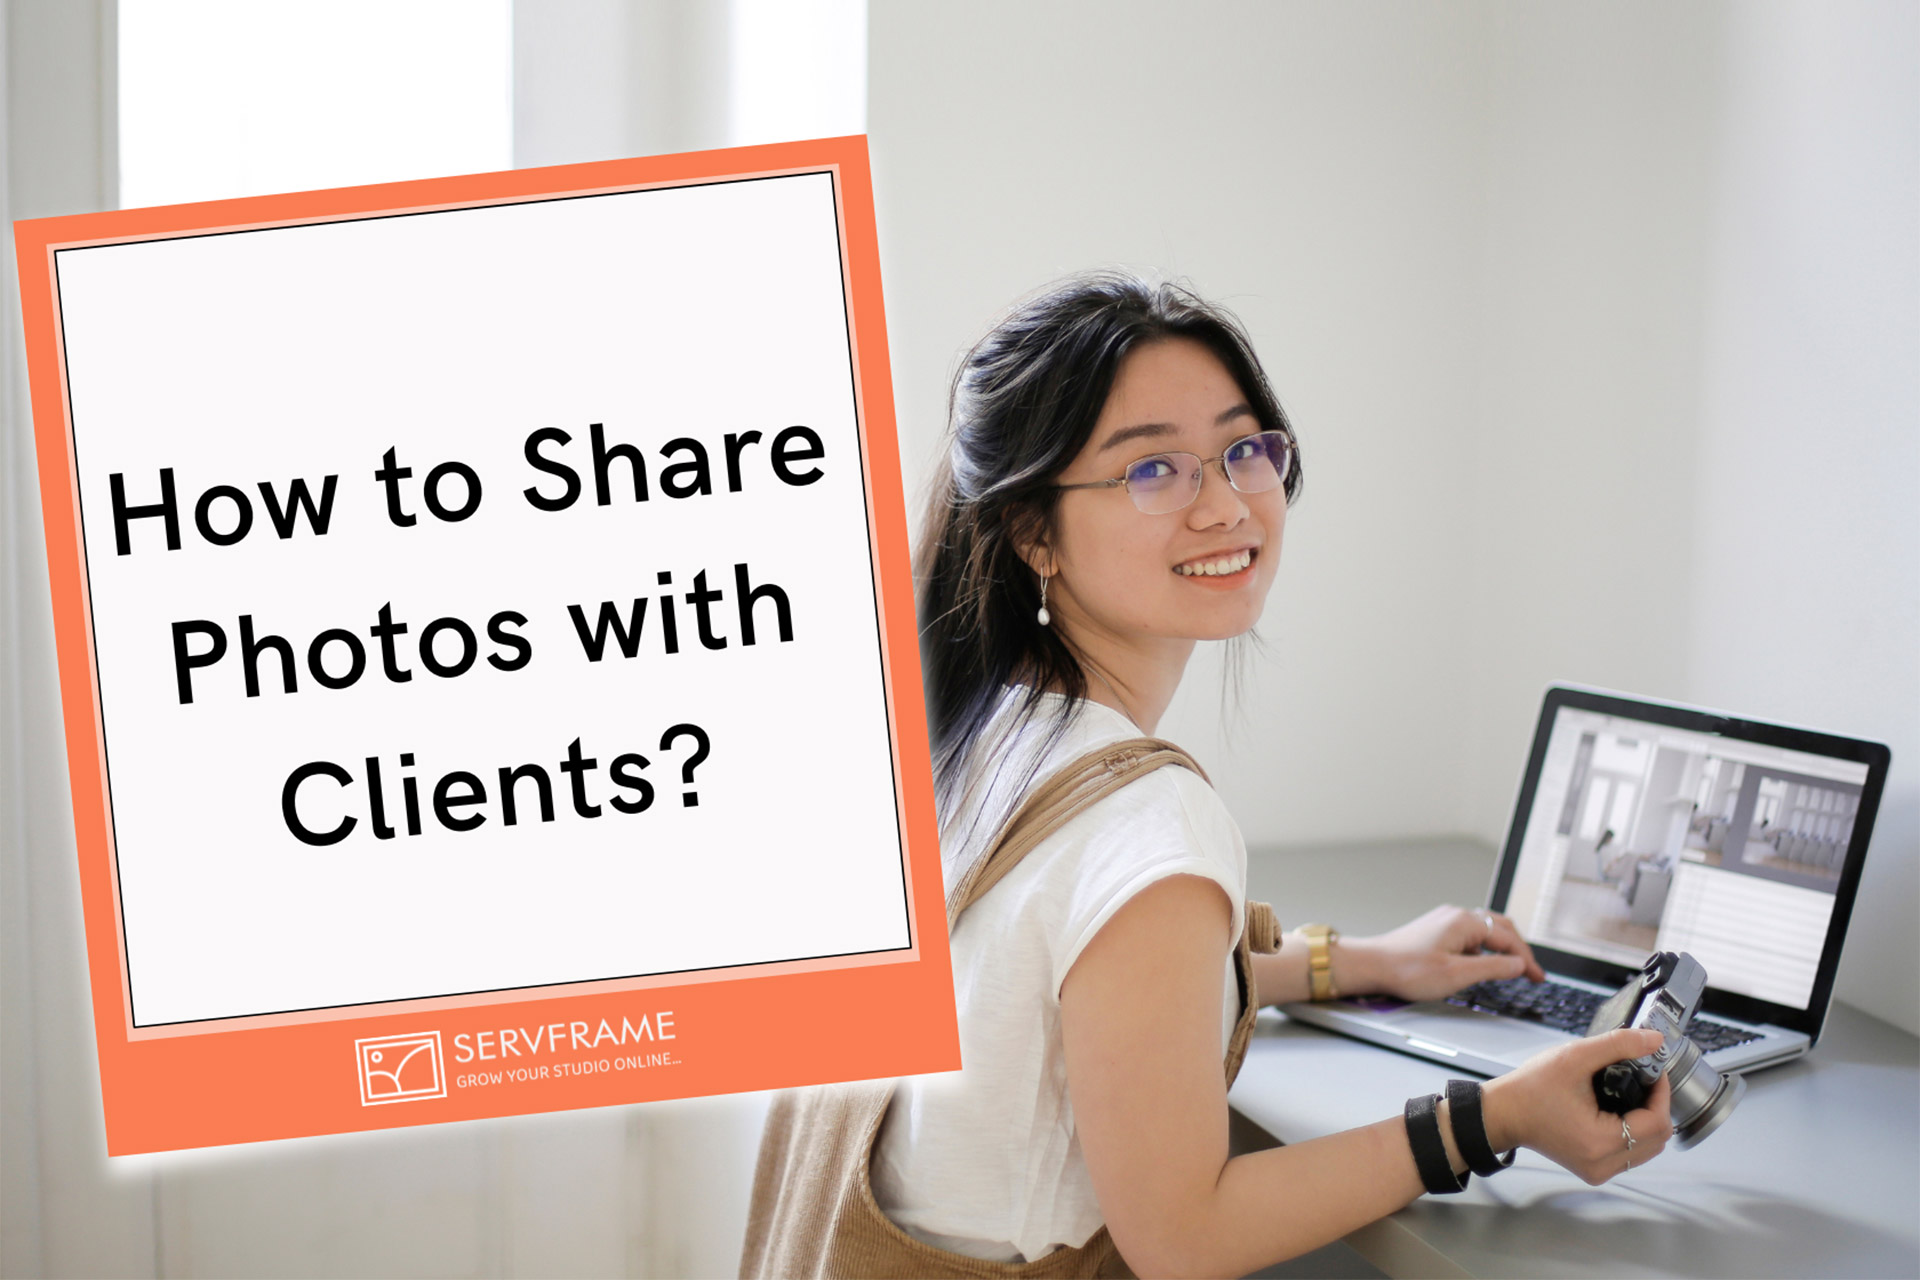 How to Share Photos with Clients?